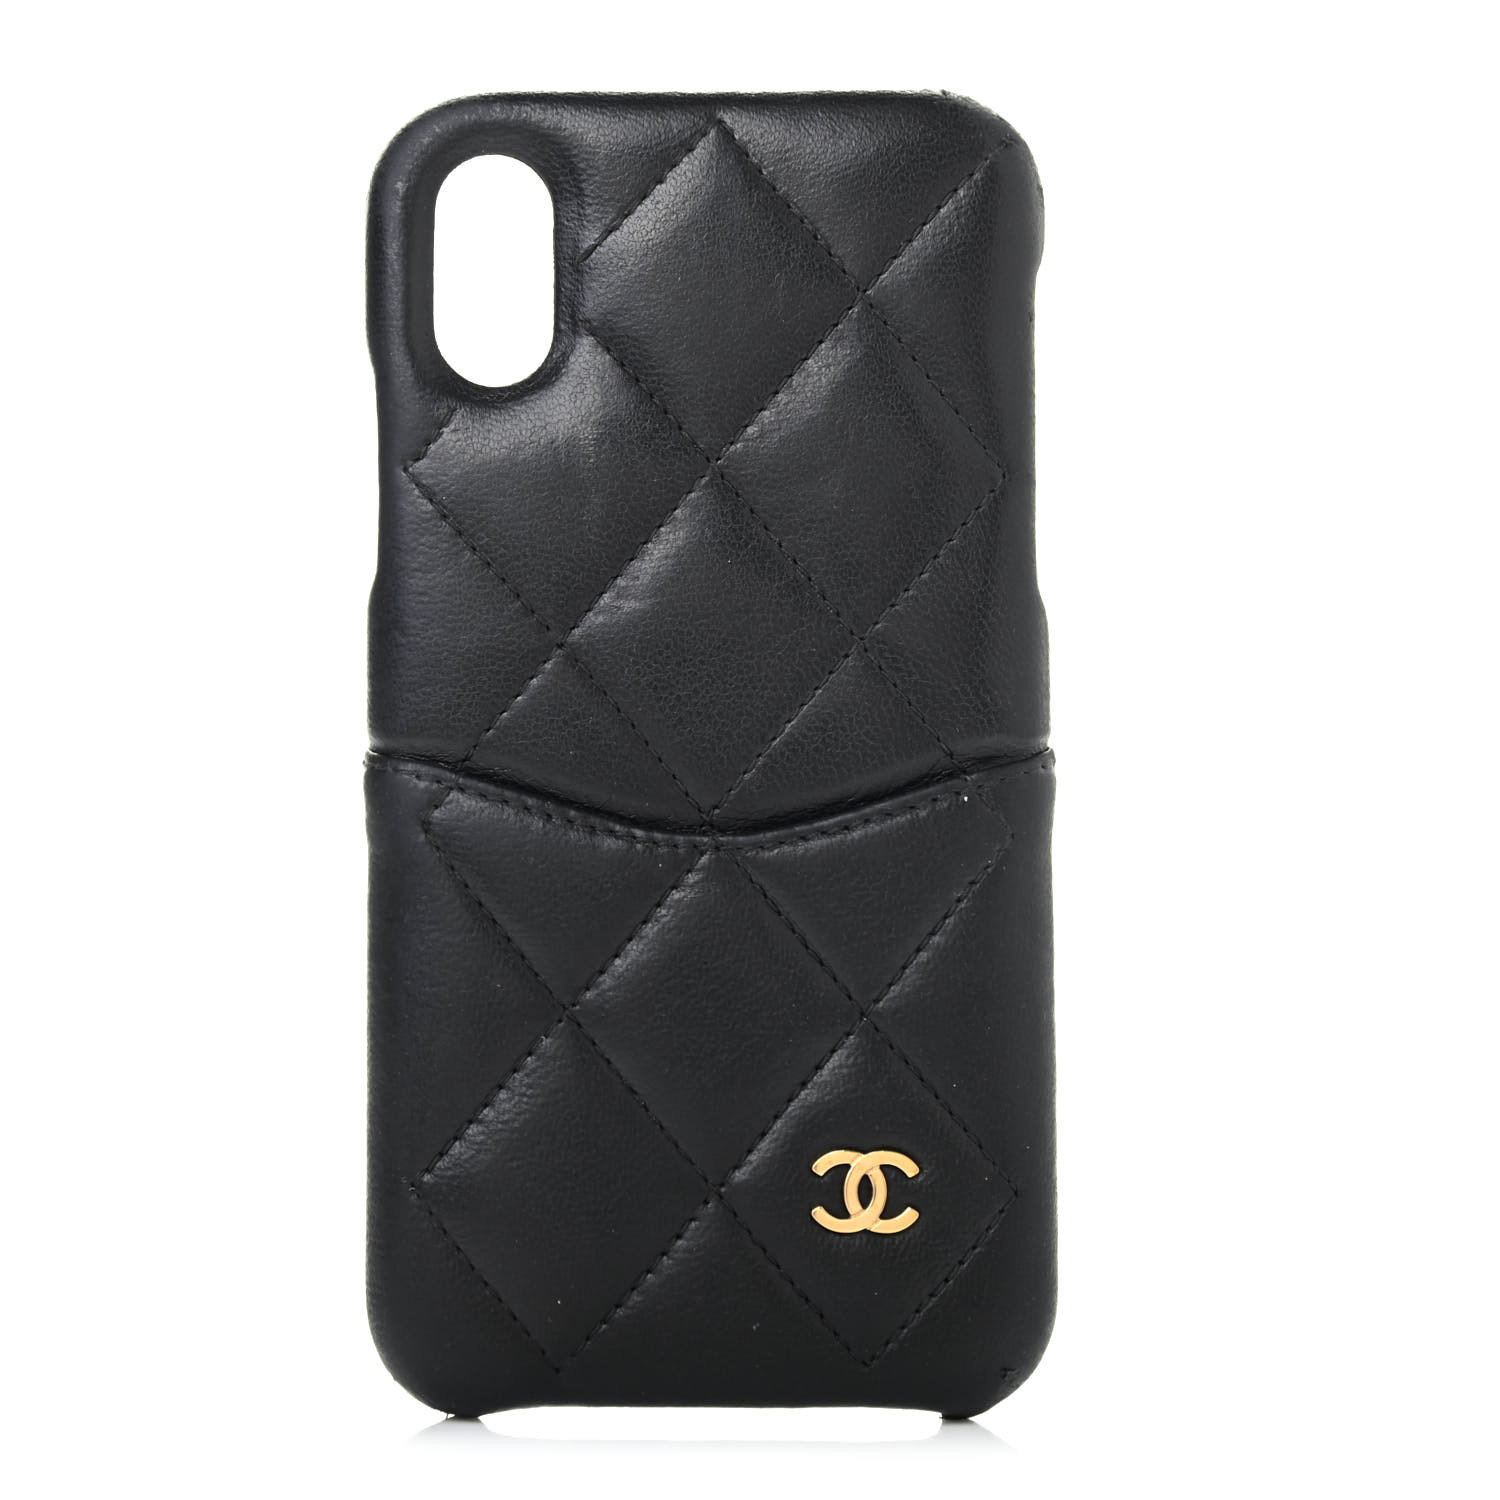 Coco Chanel iPhone case.  Chanel iphone case, Iphone cases, Iphone cases  disney